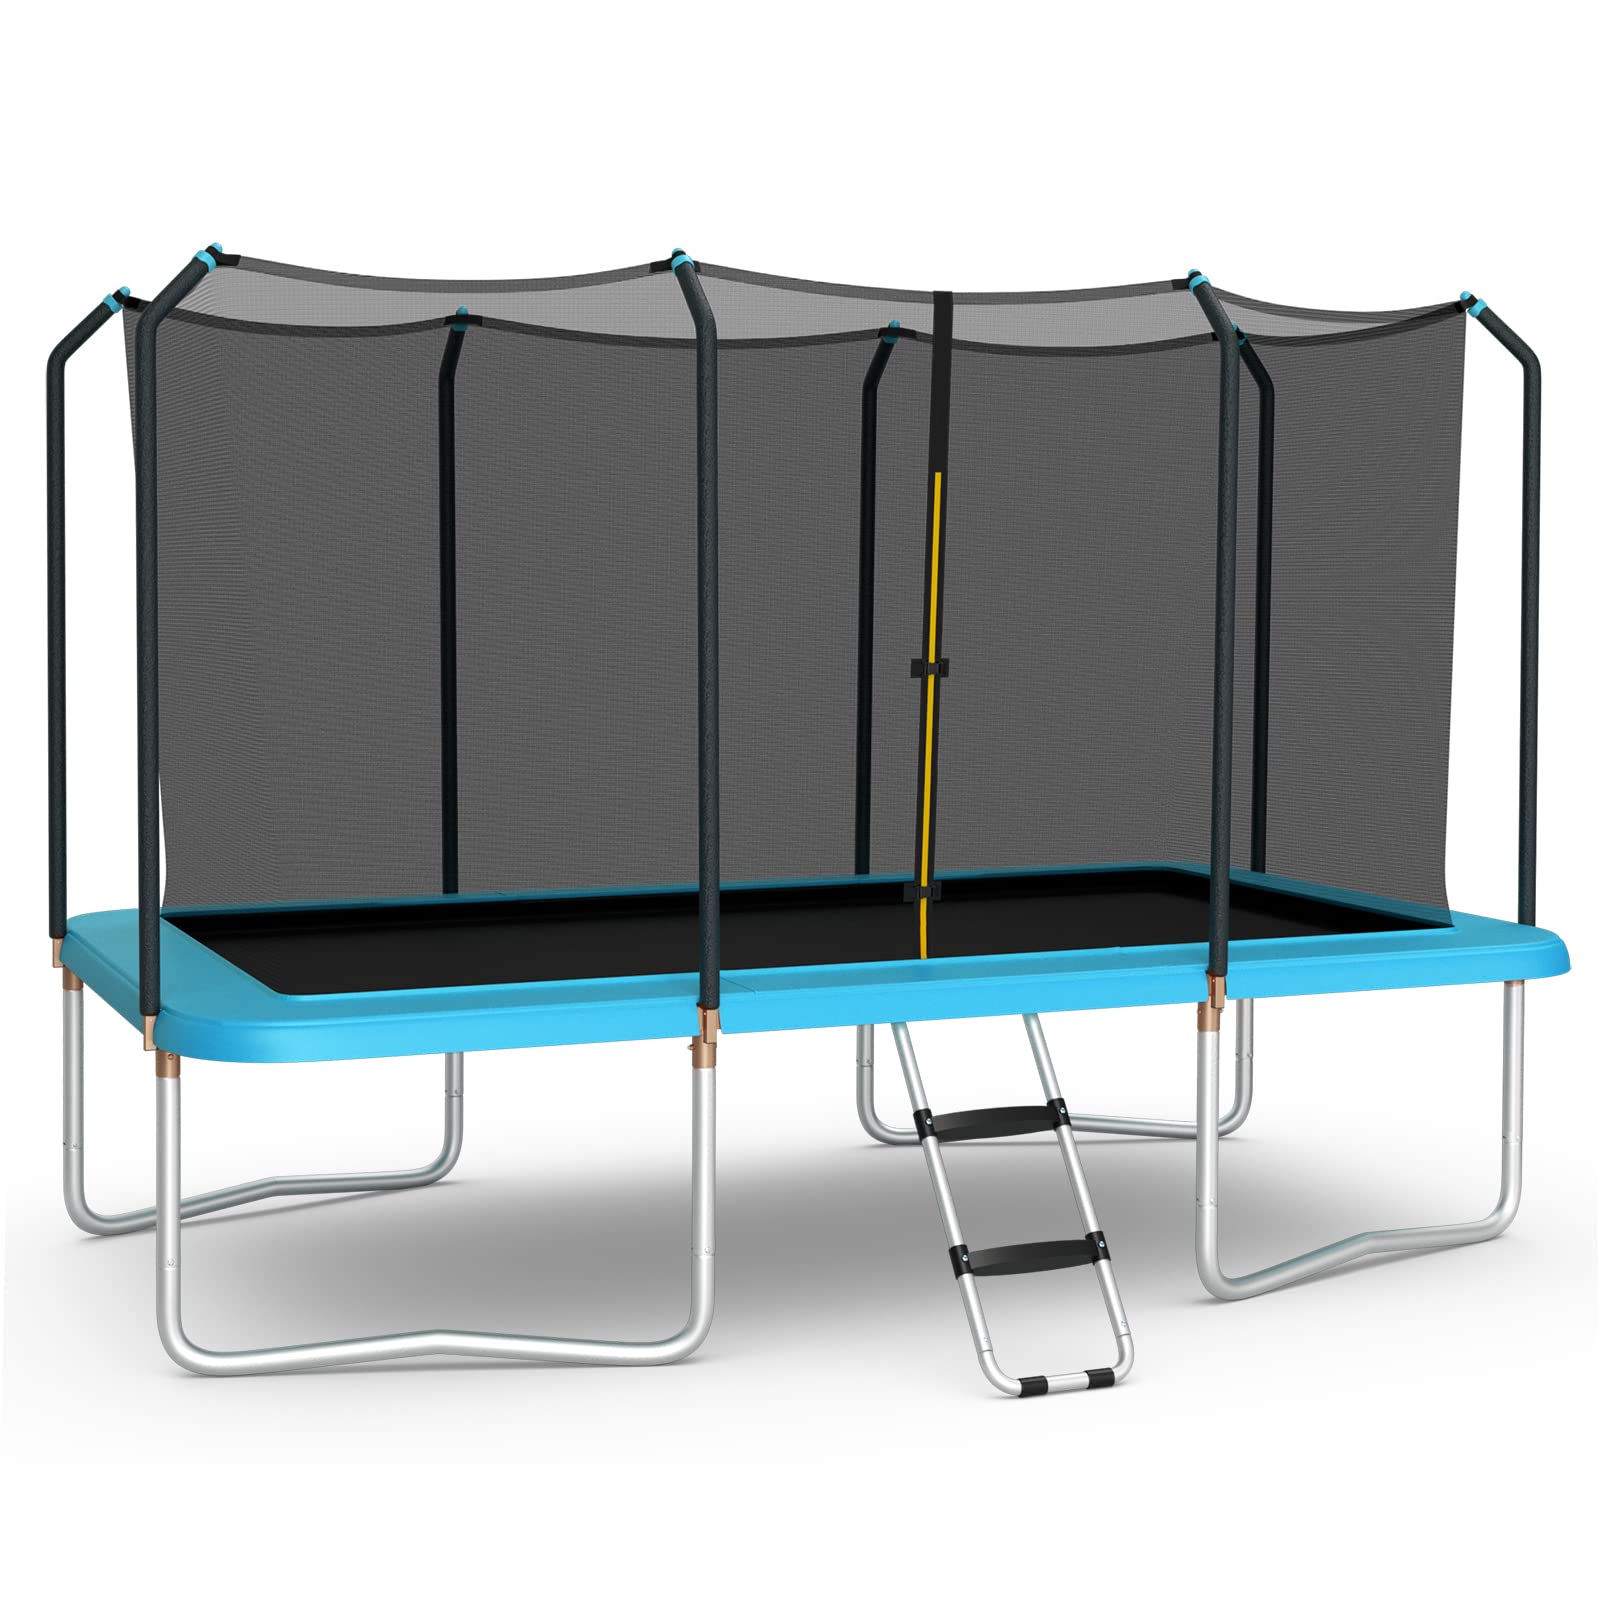 Giantex Trampoline, 8 FT x 14 FT ASTM Certified Rectangular Trampoline with Enclosure, Ladder, Double-Side Galvanized Steel Frame